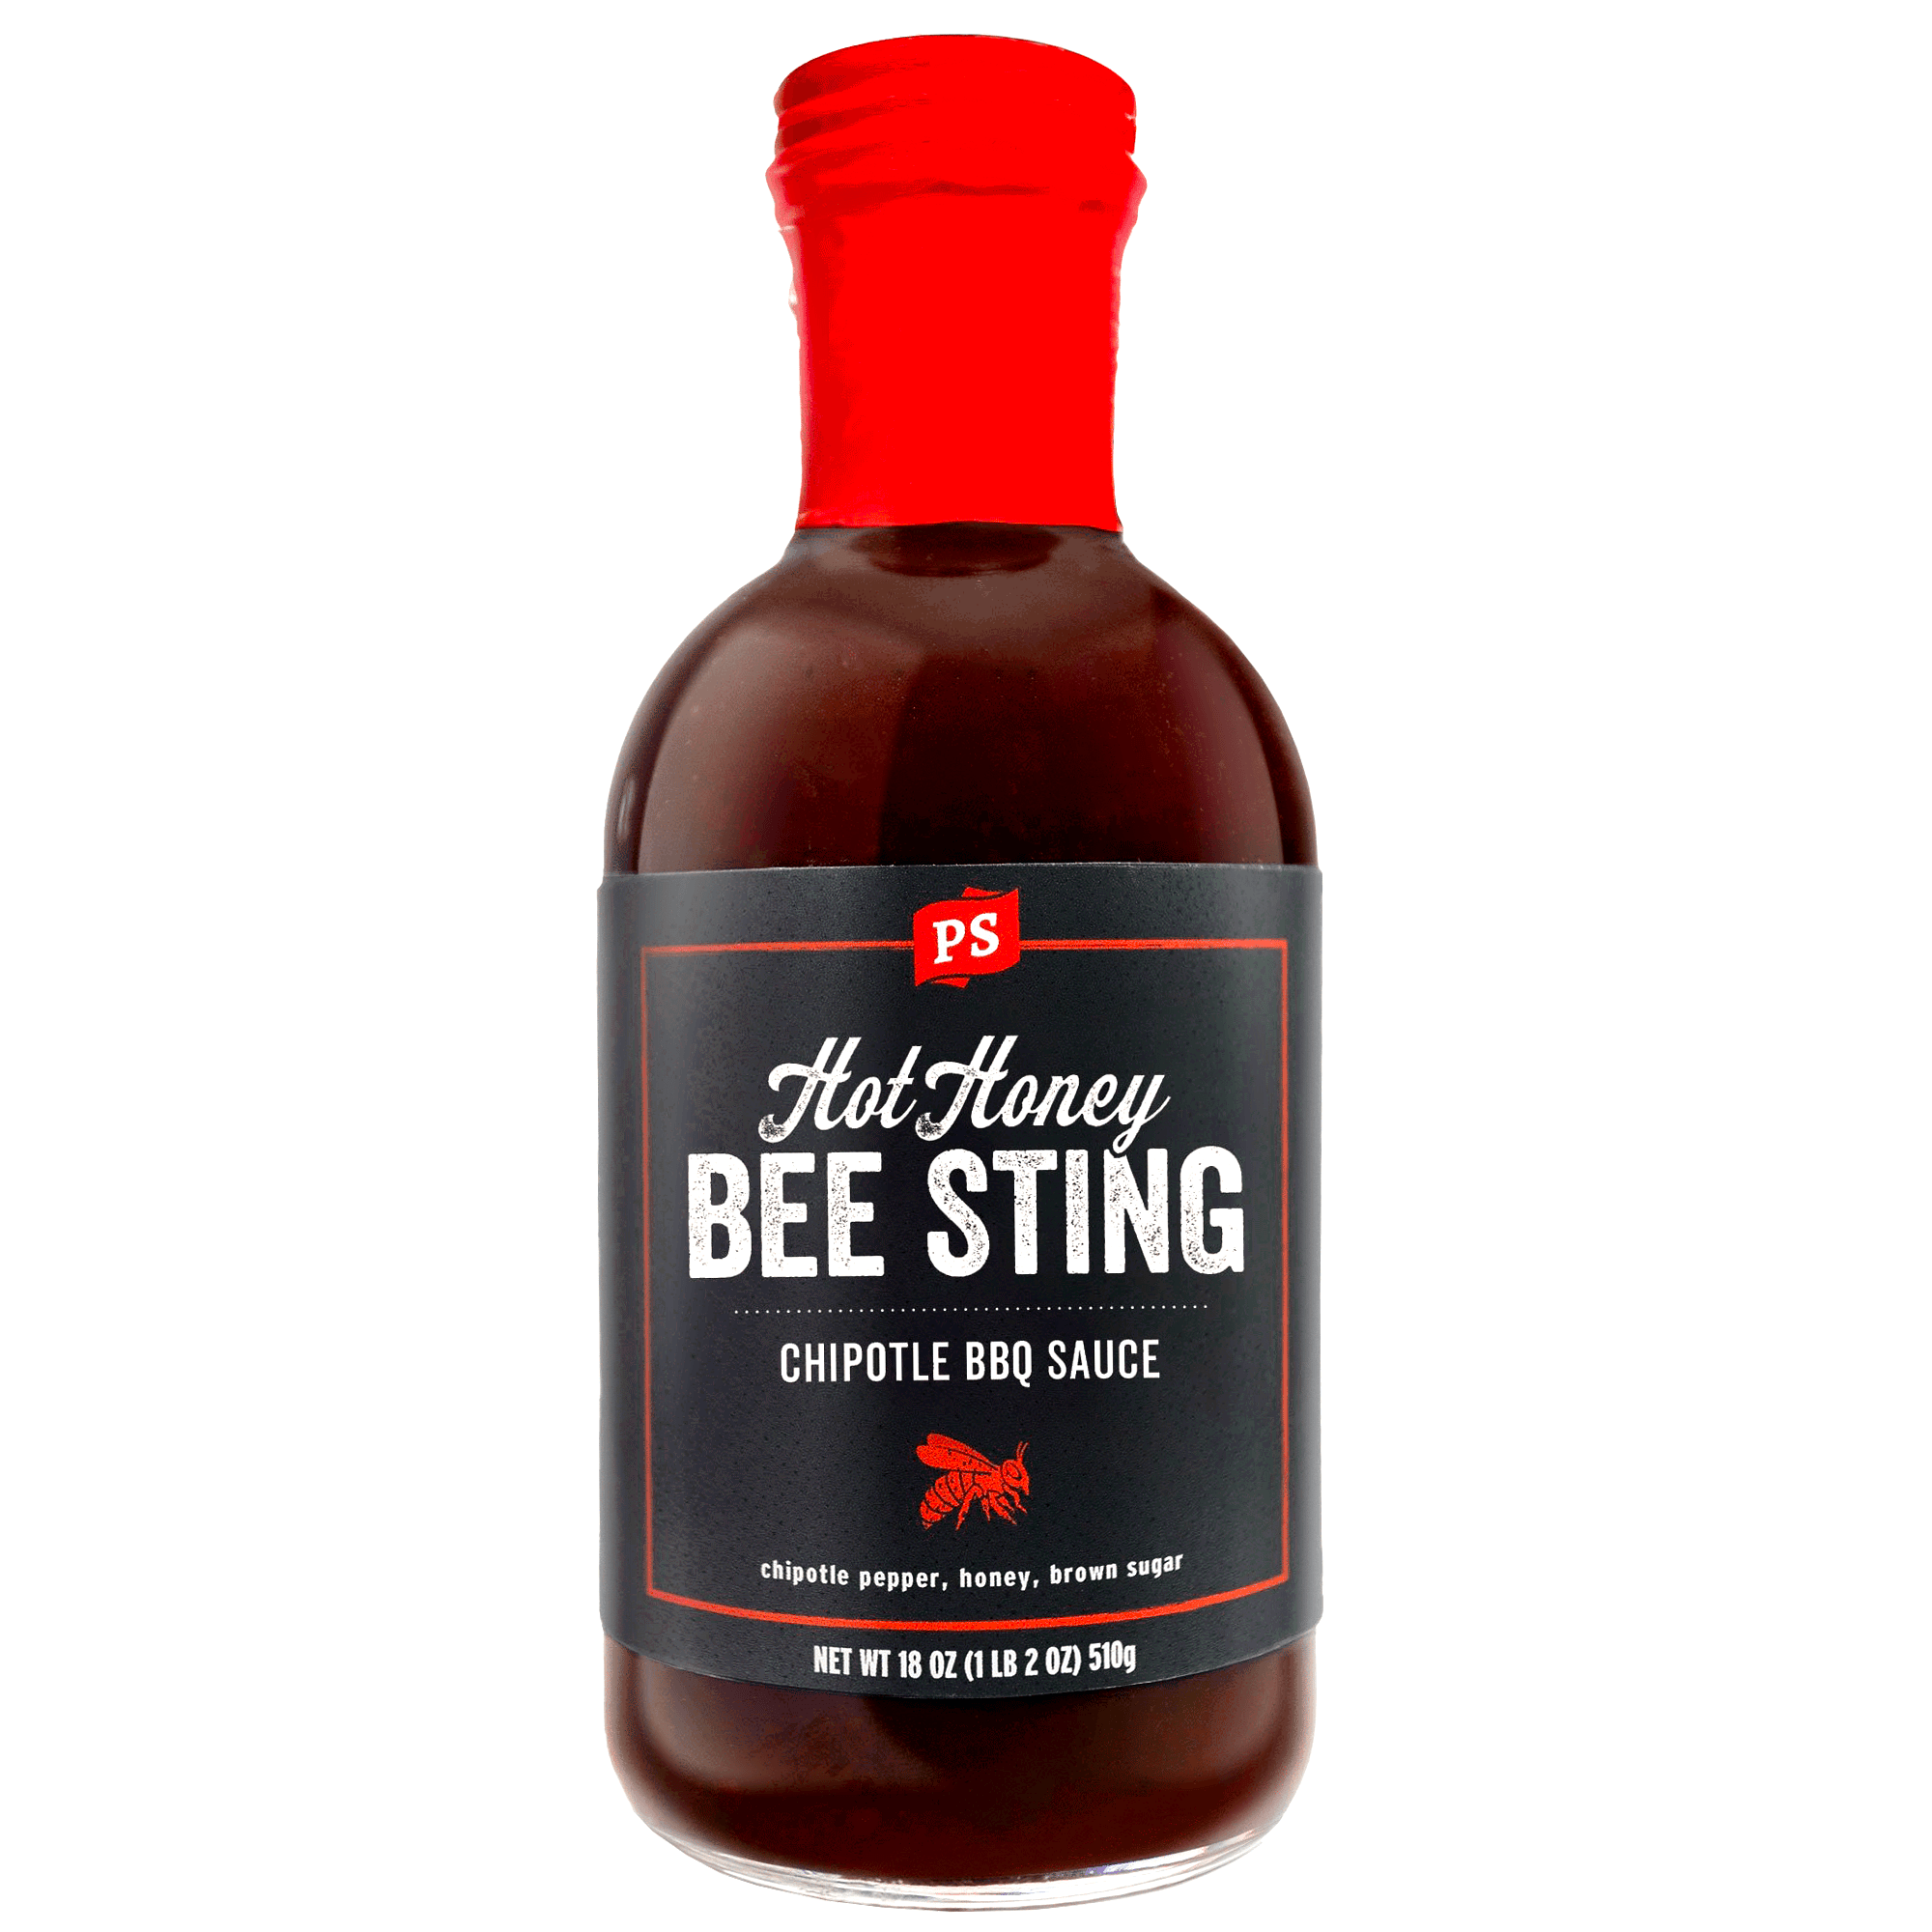 PS Seasoning BBQ Sauce Hot Honey Bee Sting - Chipotle Sauce - Leapfrog Outdoor Sports and Apparel